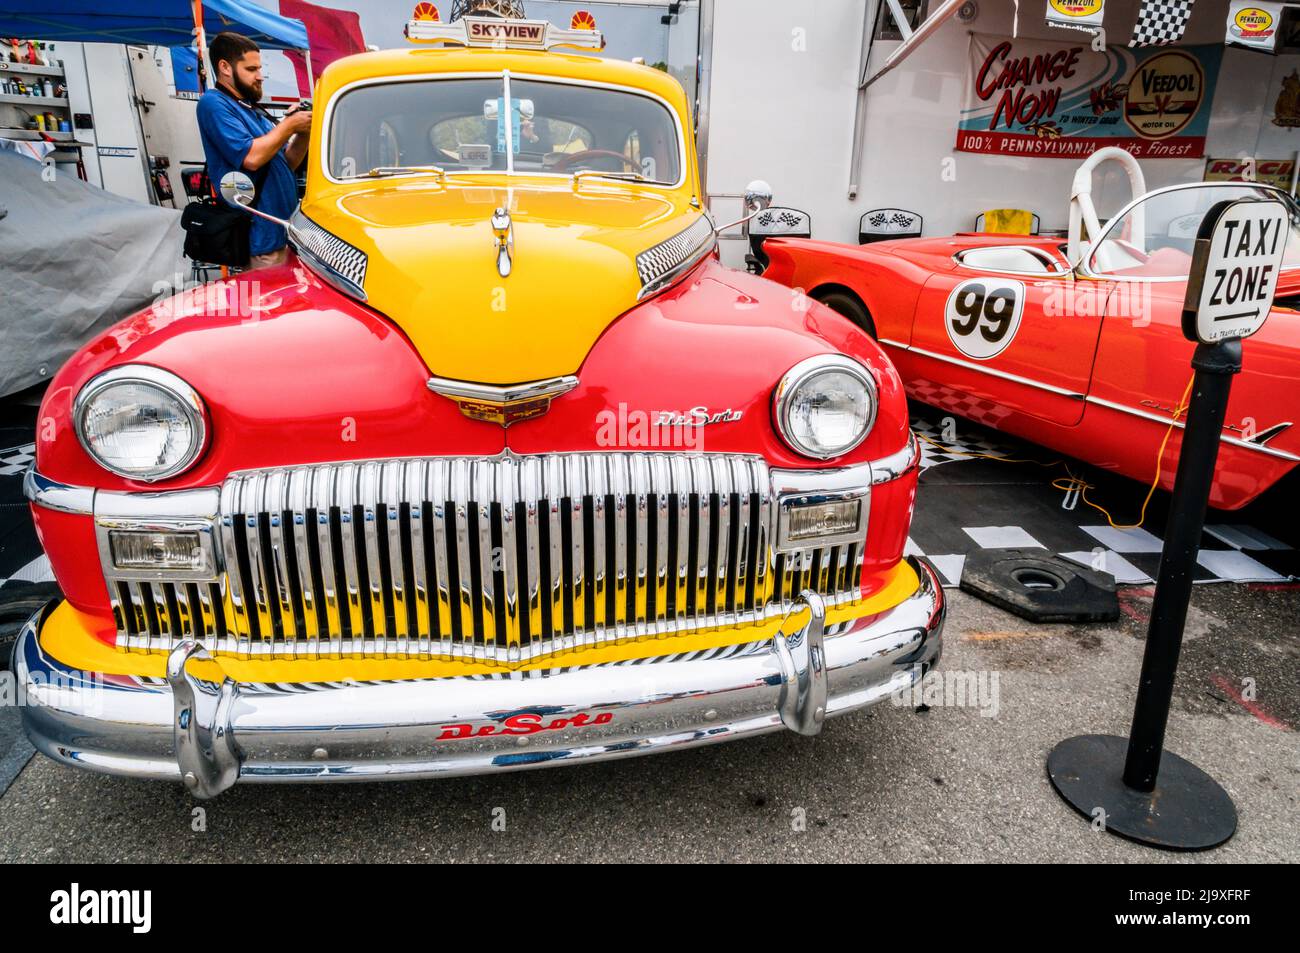 Vintage and classic cars ready to race at Laguna Seca racetrack in Monterey, California during the annual Reunion events of car week. Stock Photo